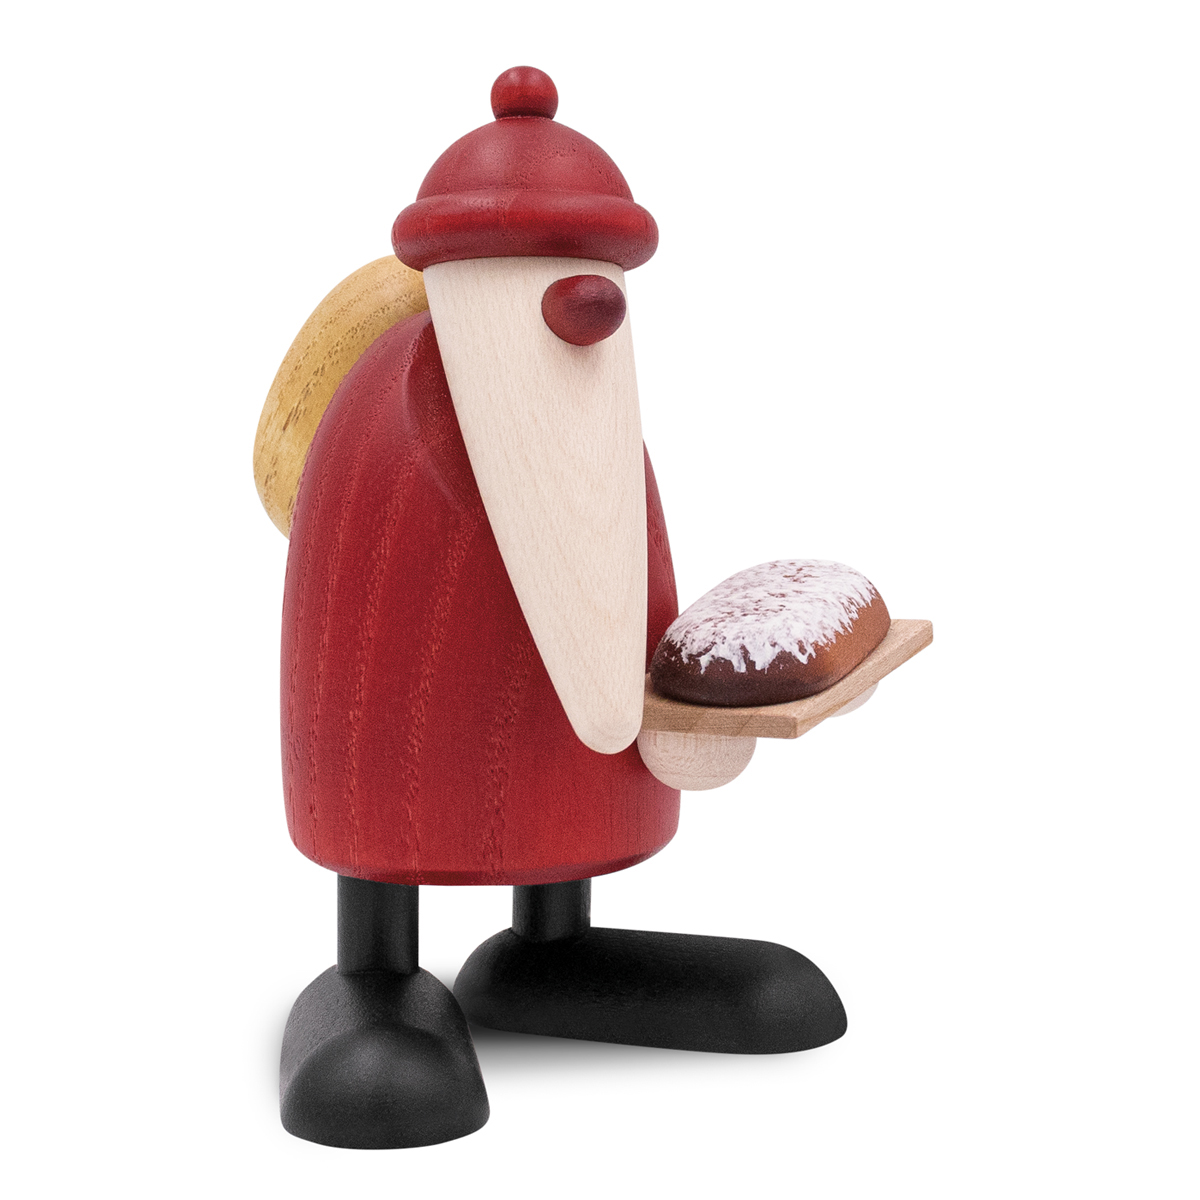 Santa Claus with German Christmas stollen, small